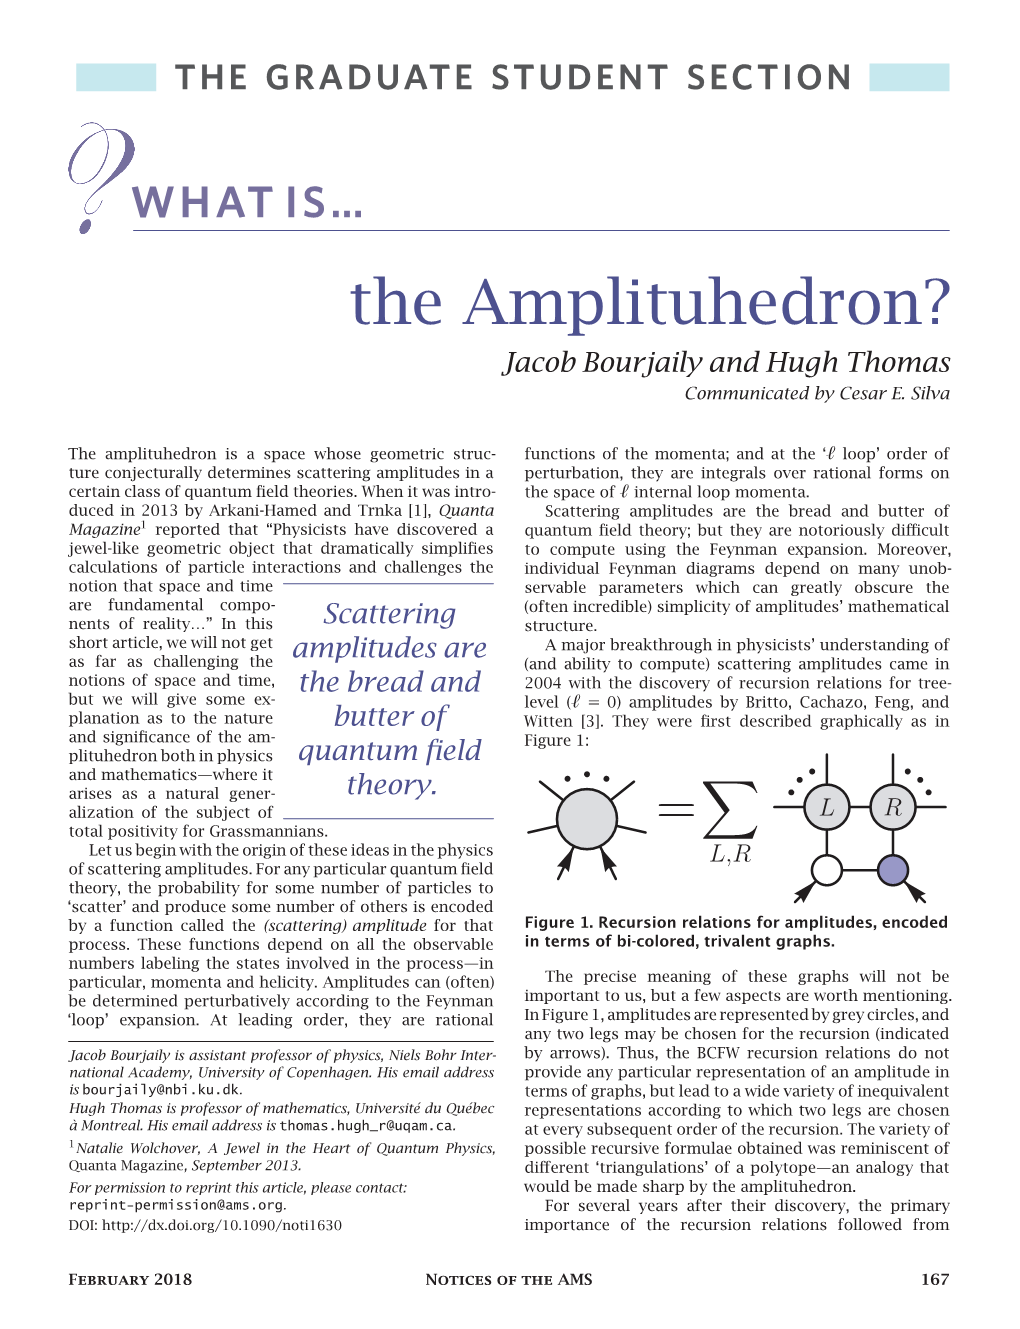 The Amplituhedron? Jacob Bourjaily and Hugh Thomas Communicated by Cesar E